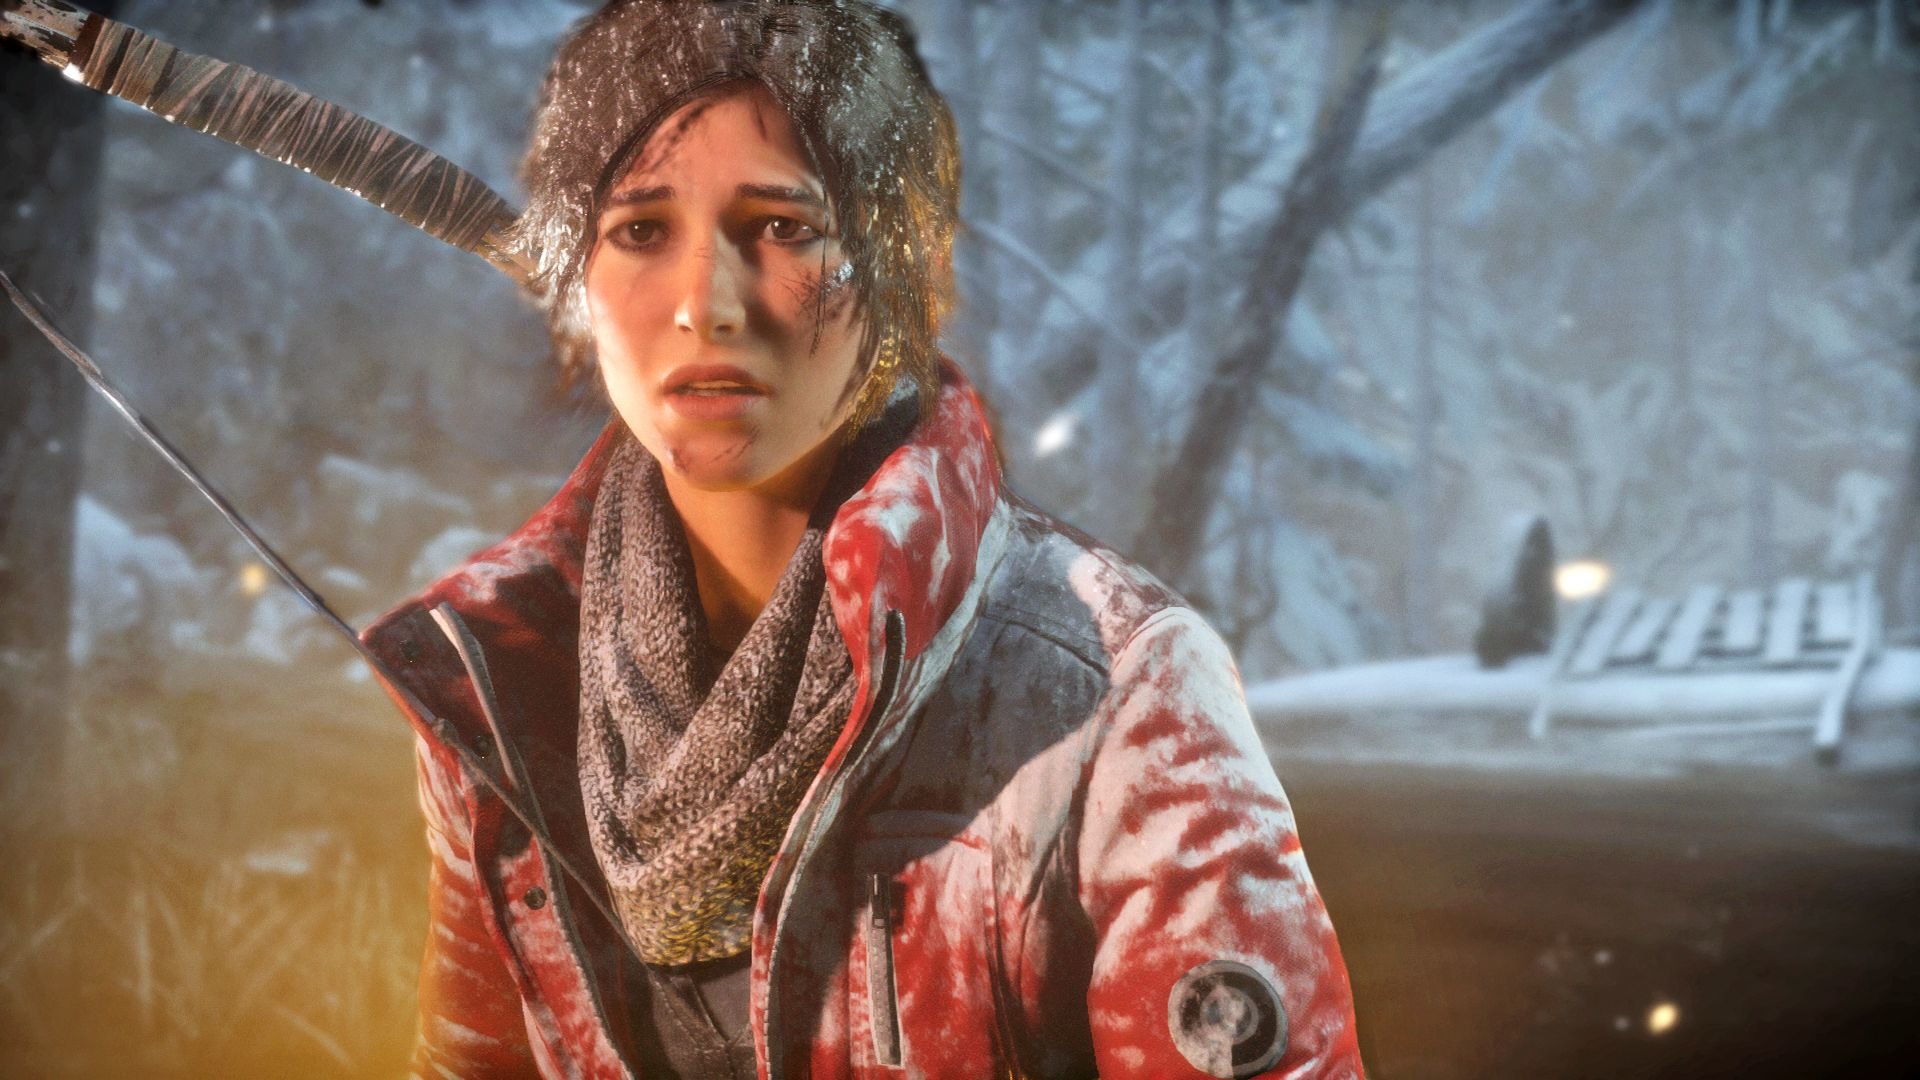 Best Rise Of The Tomb Raider background ID:83923 for High Resolution full hd 1920x1080 desktop